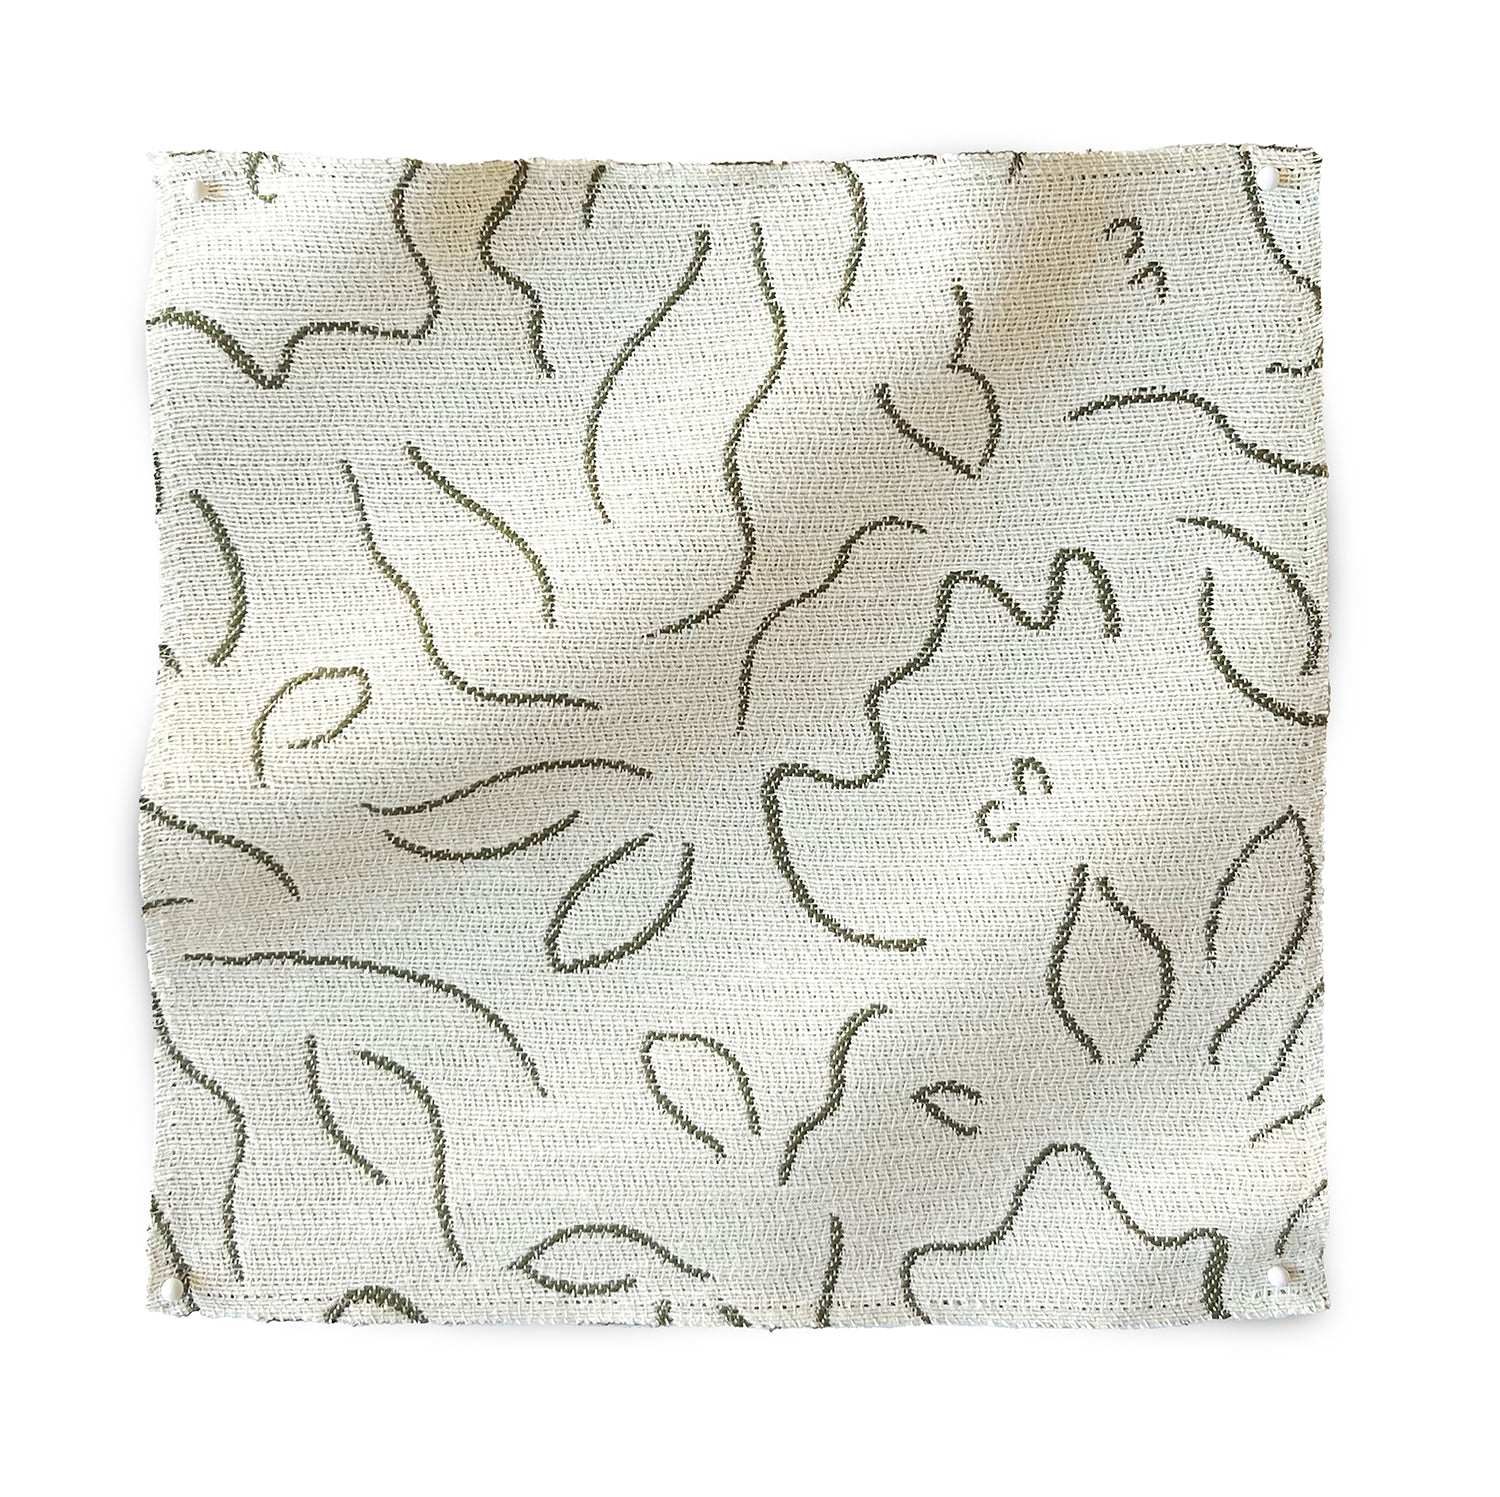 Square fabric swatch in a minimalist floral print in olive on a cream field.